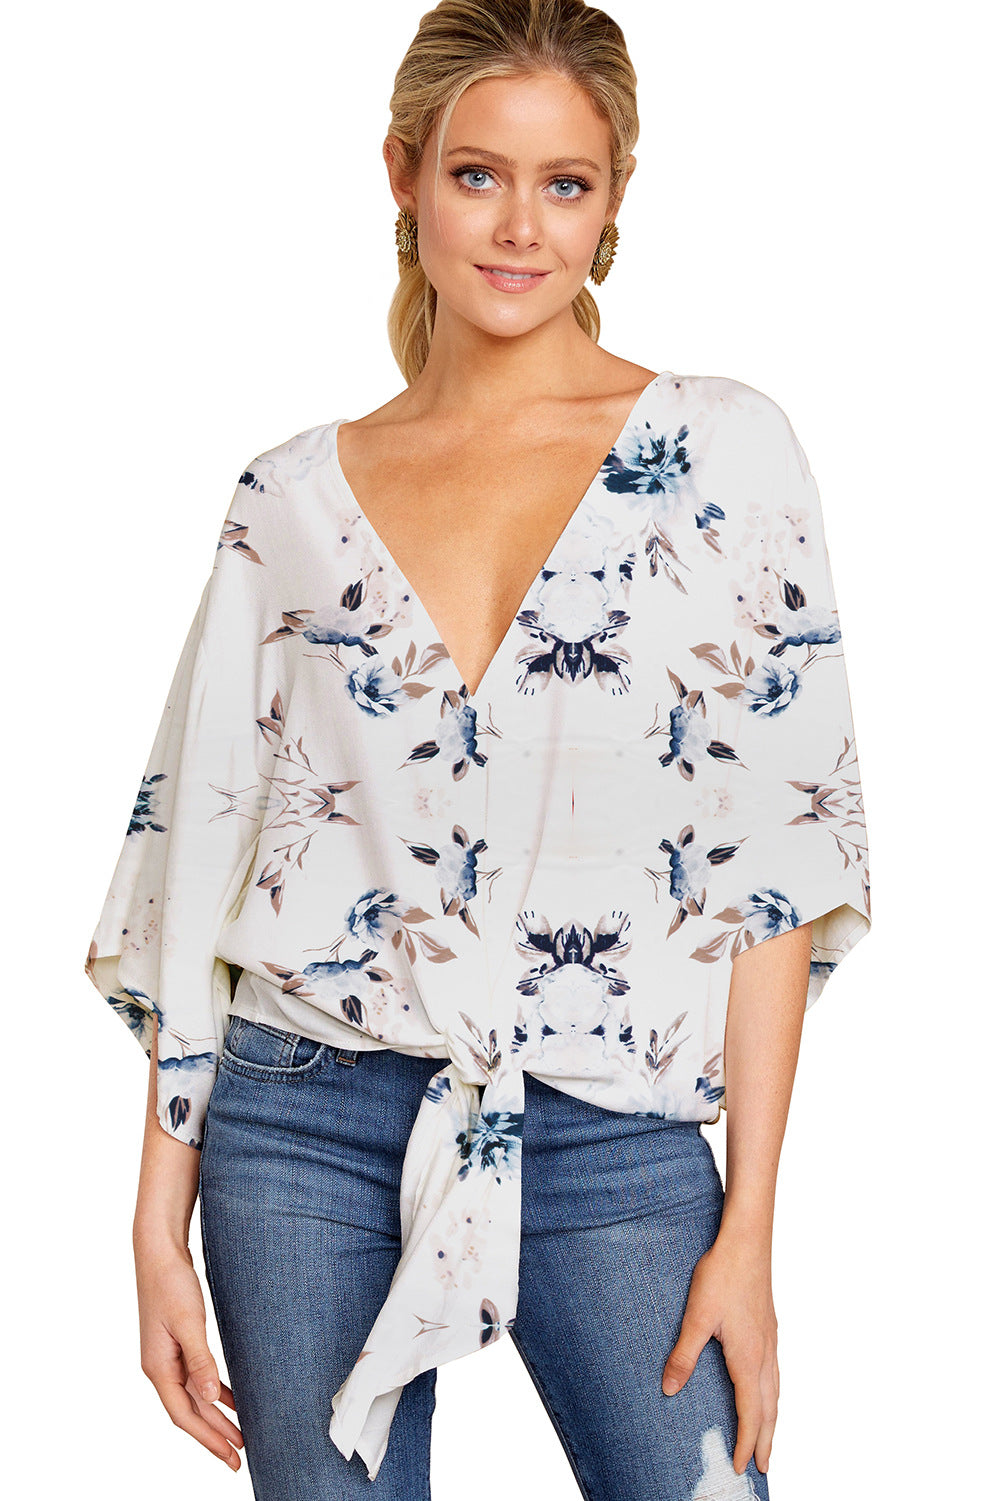 Plus size printed Top  Tops Thecurvestory